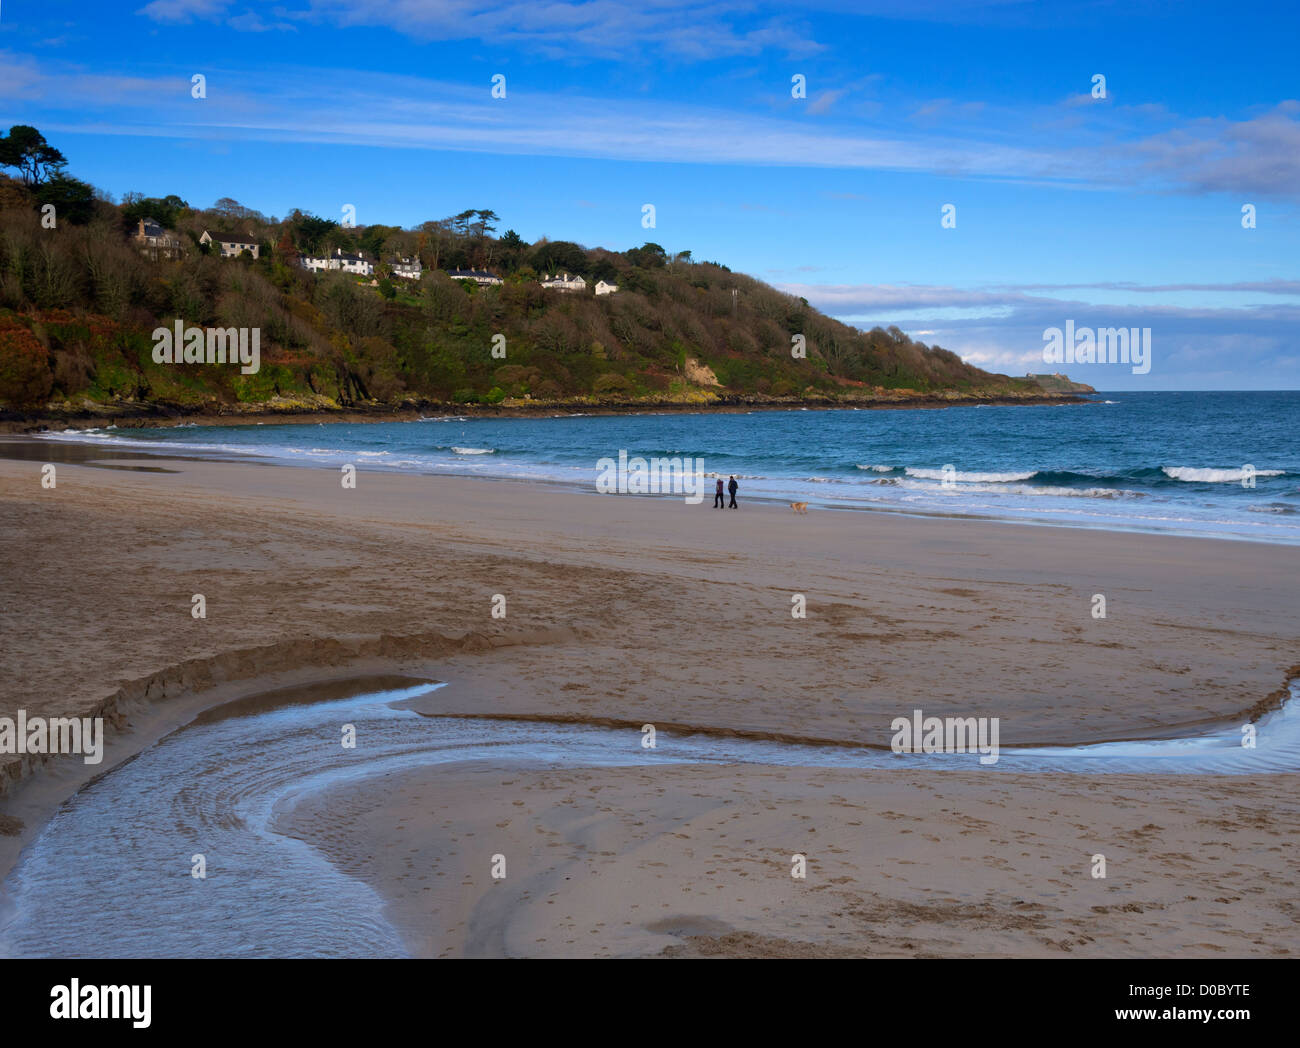 A walk on the beach at Carbis Bay, Cornwall Stock Photo